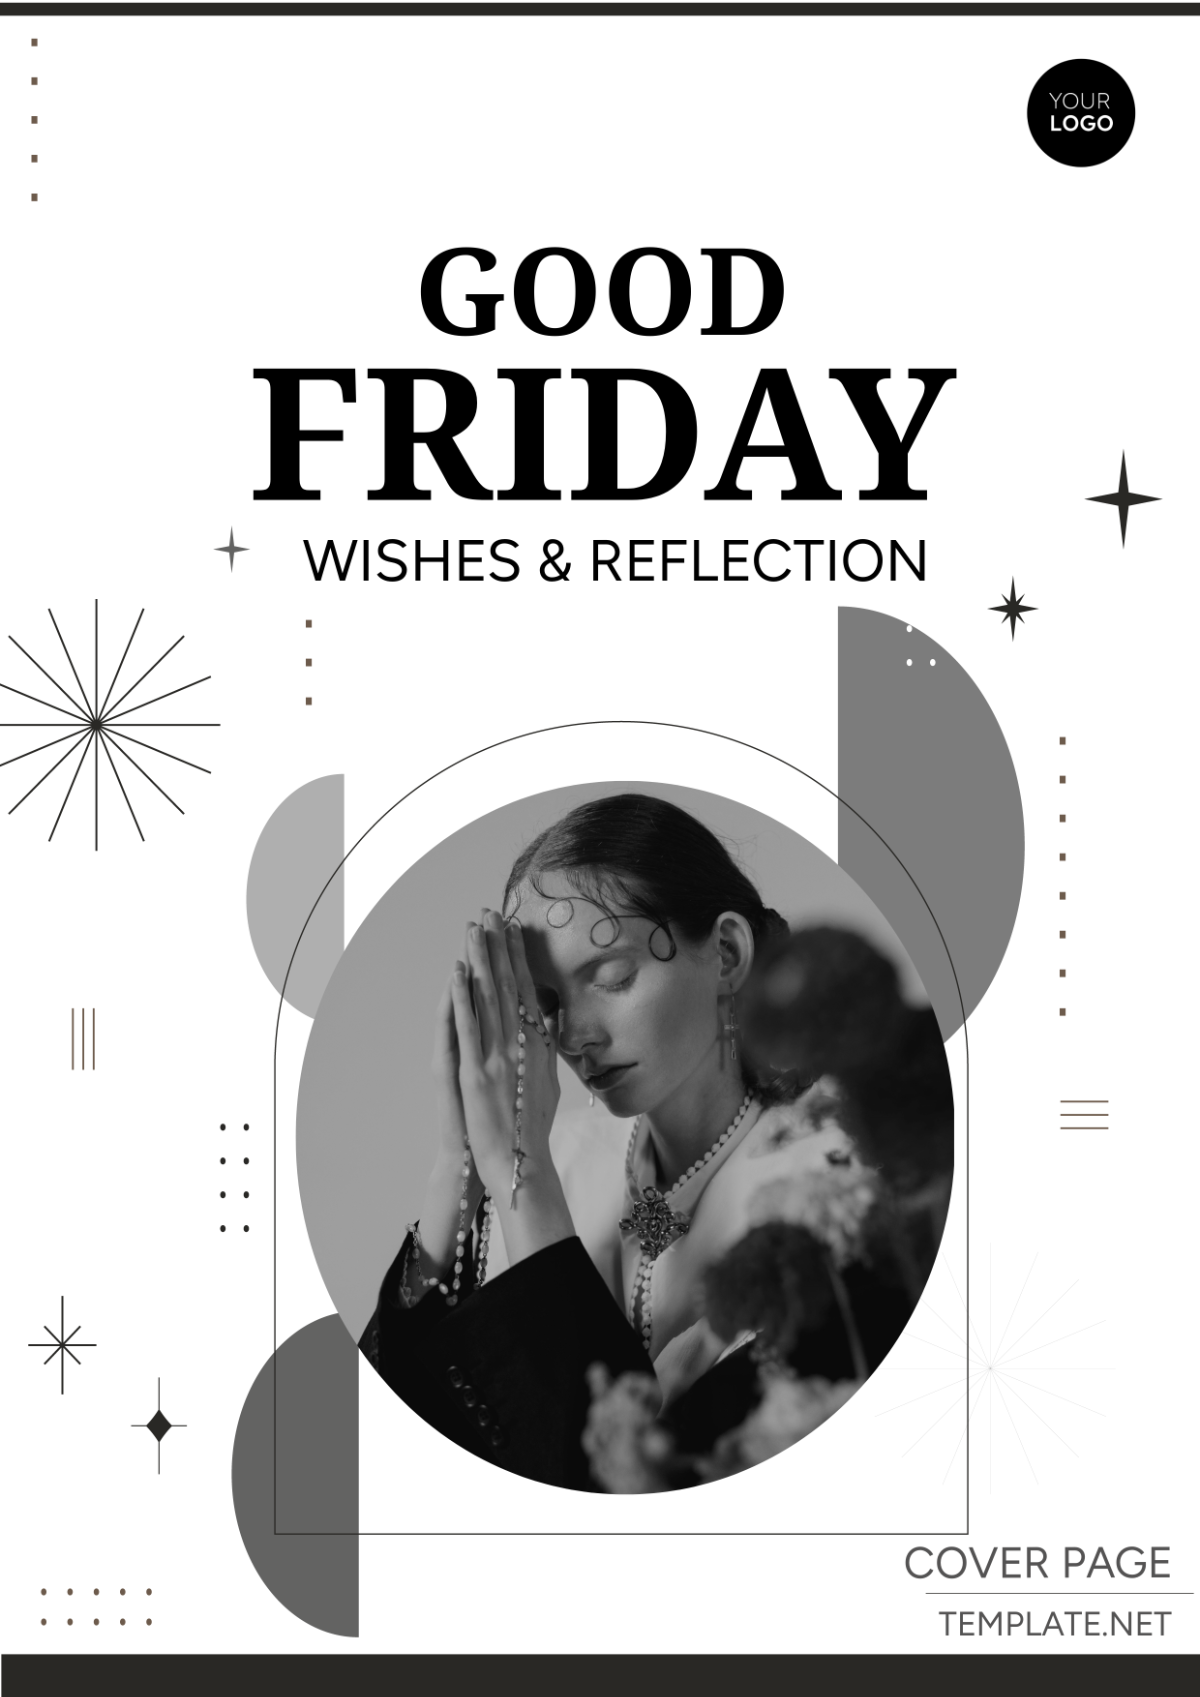 Good Friday Wishes & Reflections Cover Page